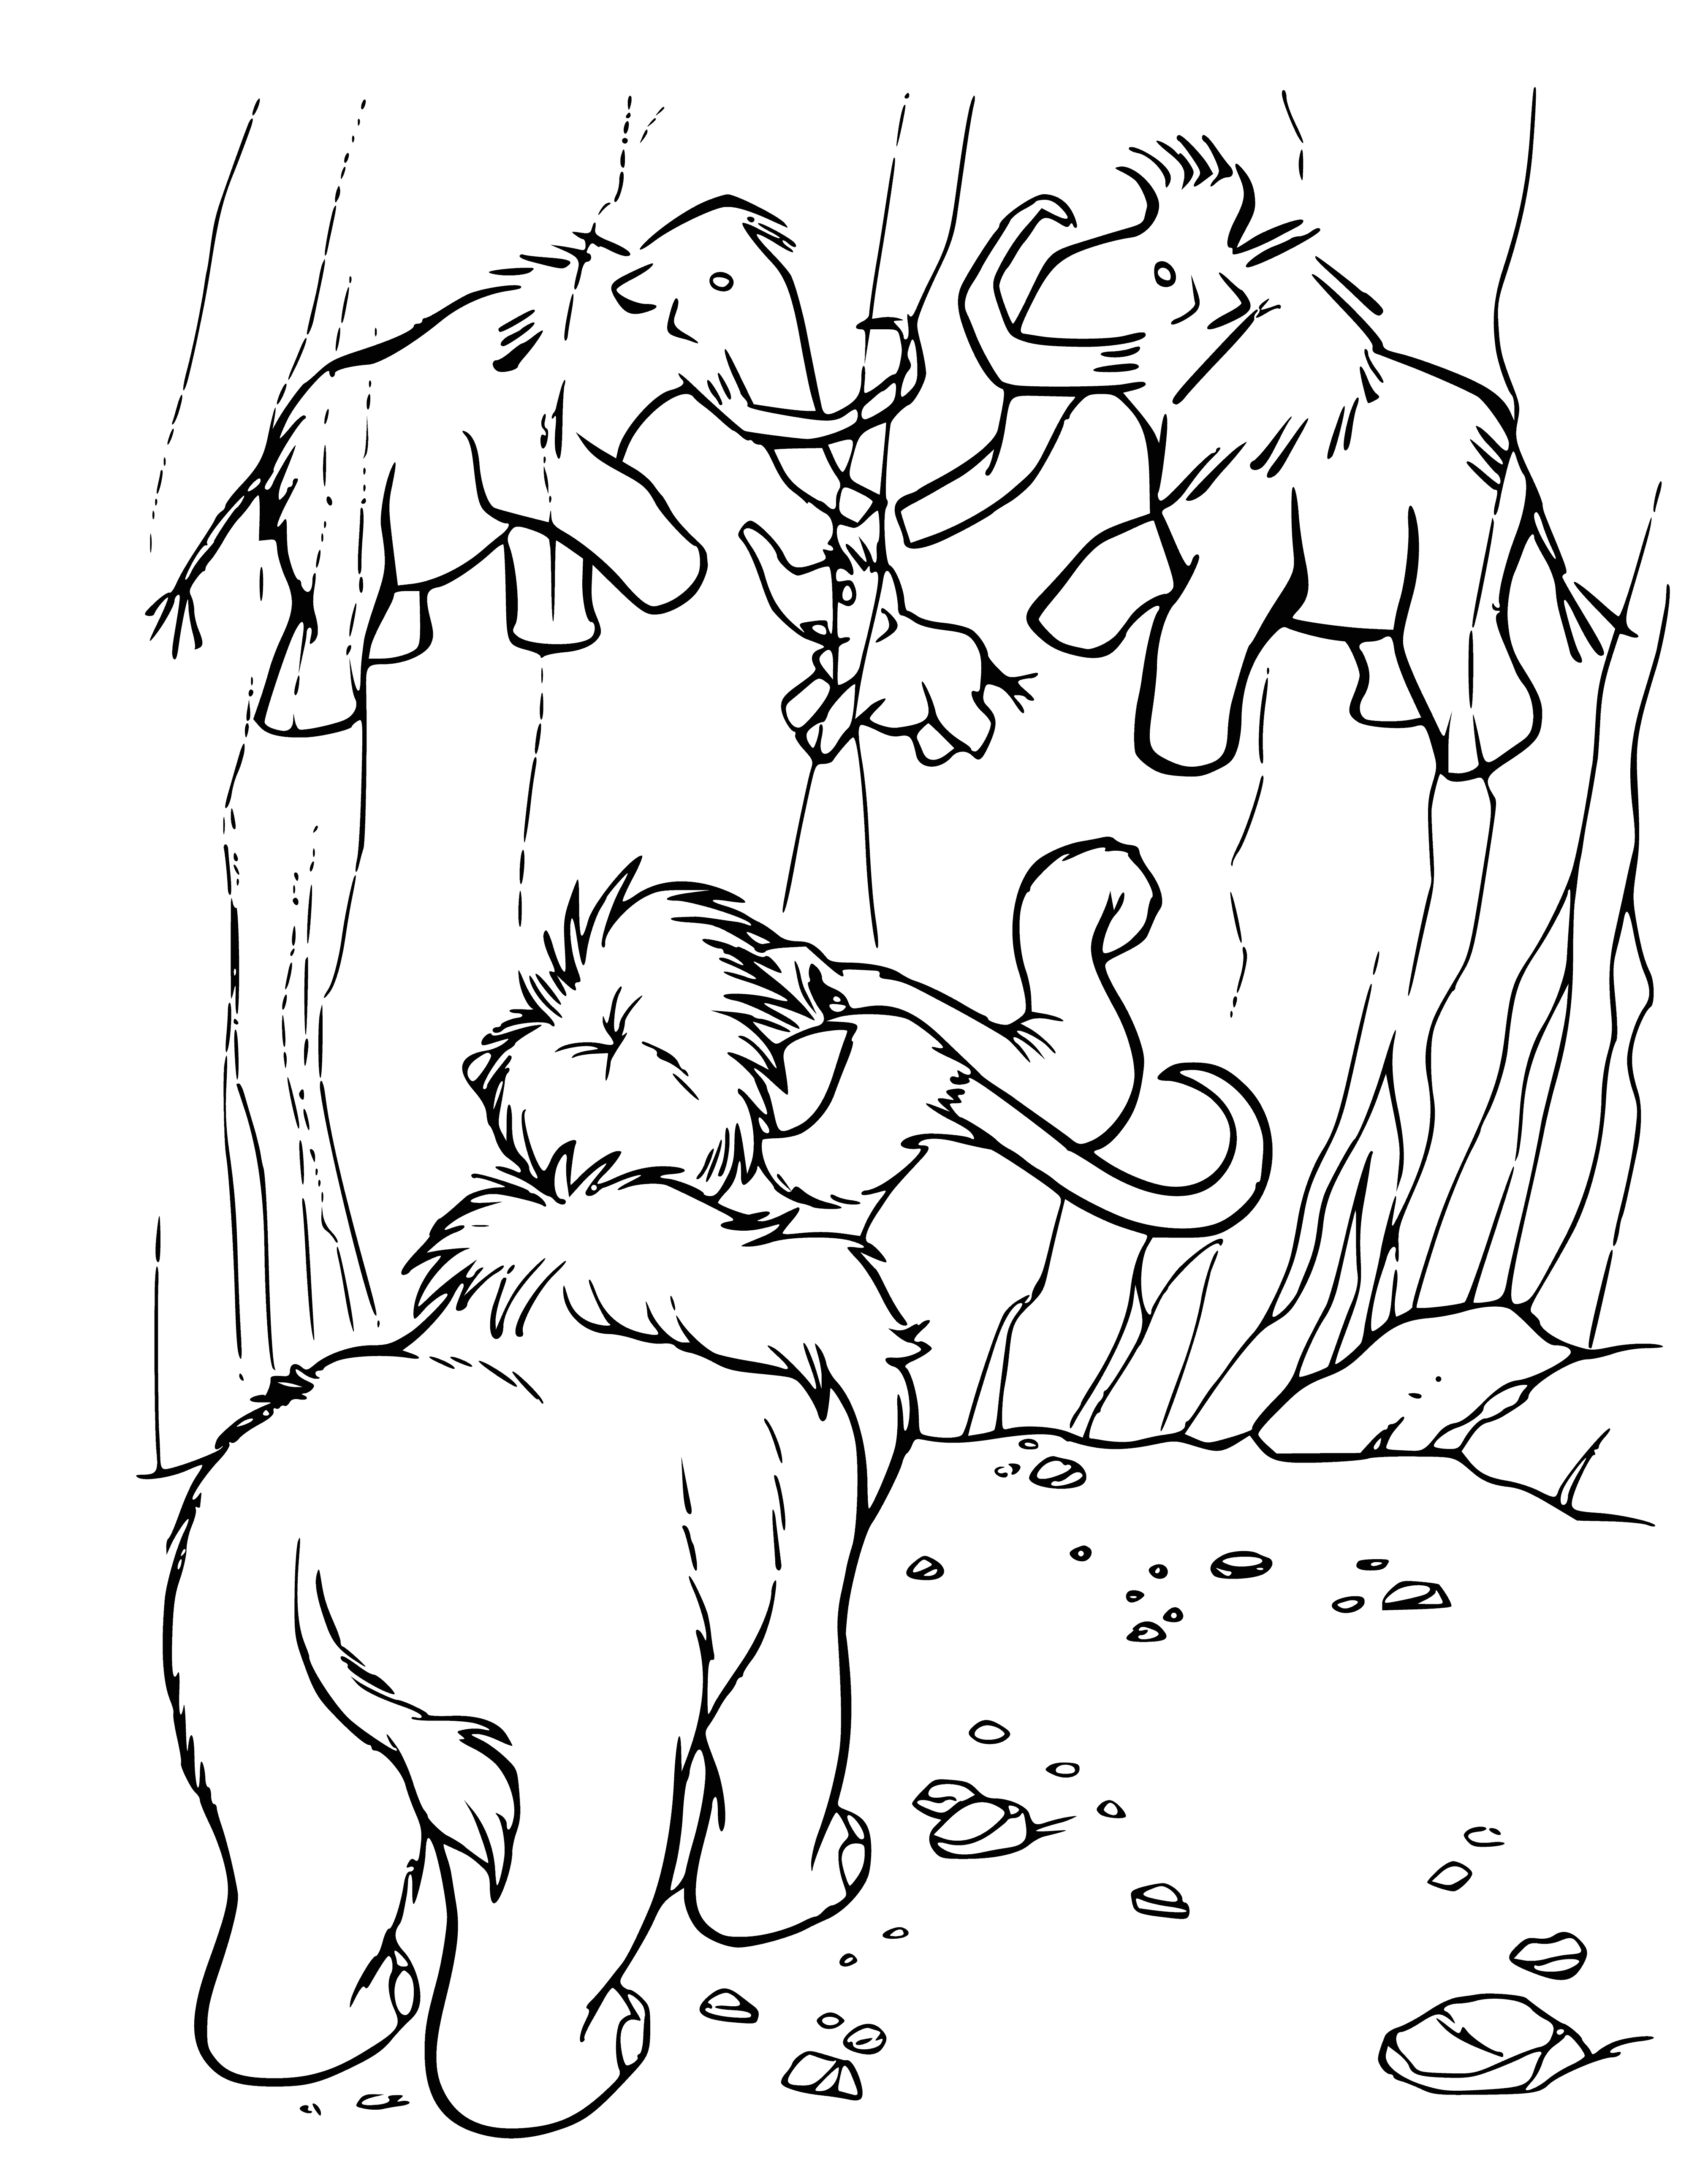 coloring page: Mammoth lies on snow, trunk extended, tusks visible. Shaggy fur mostly white with some brown patches. Eyes closed, appears dead.